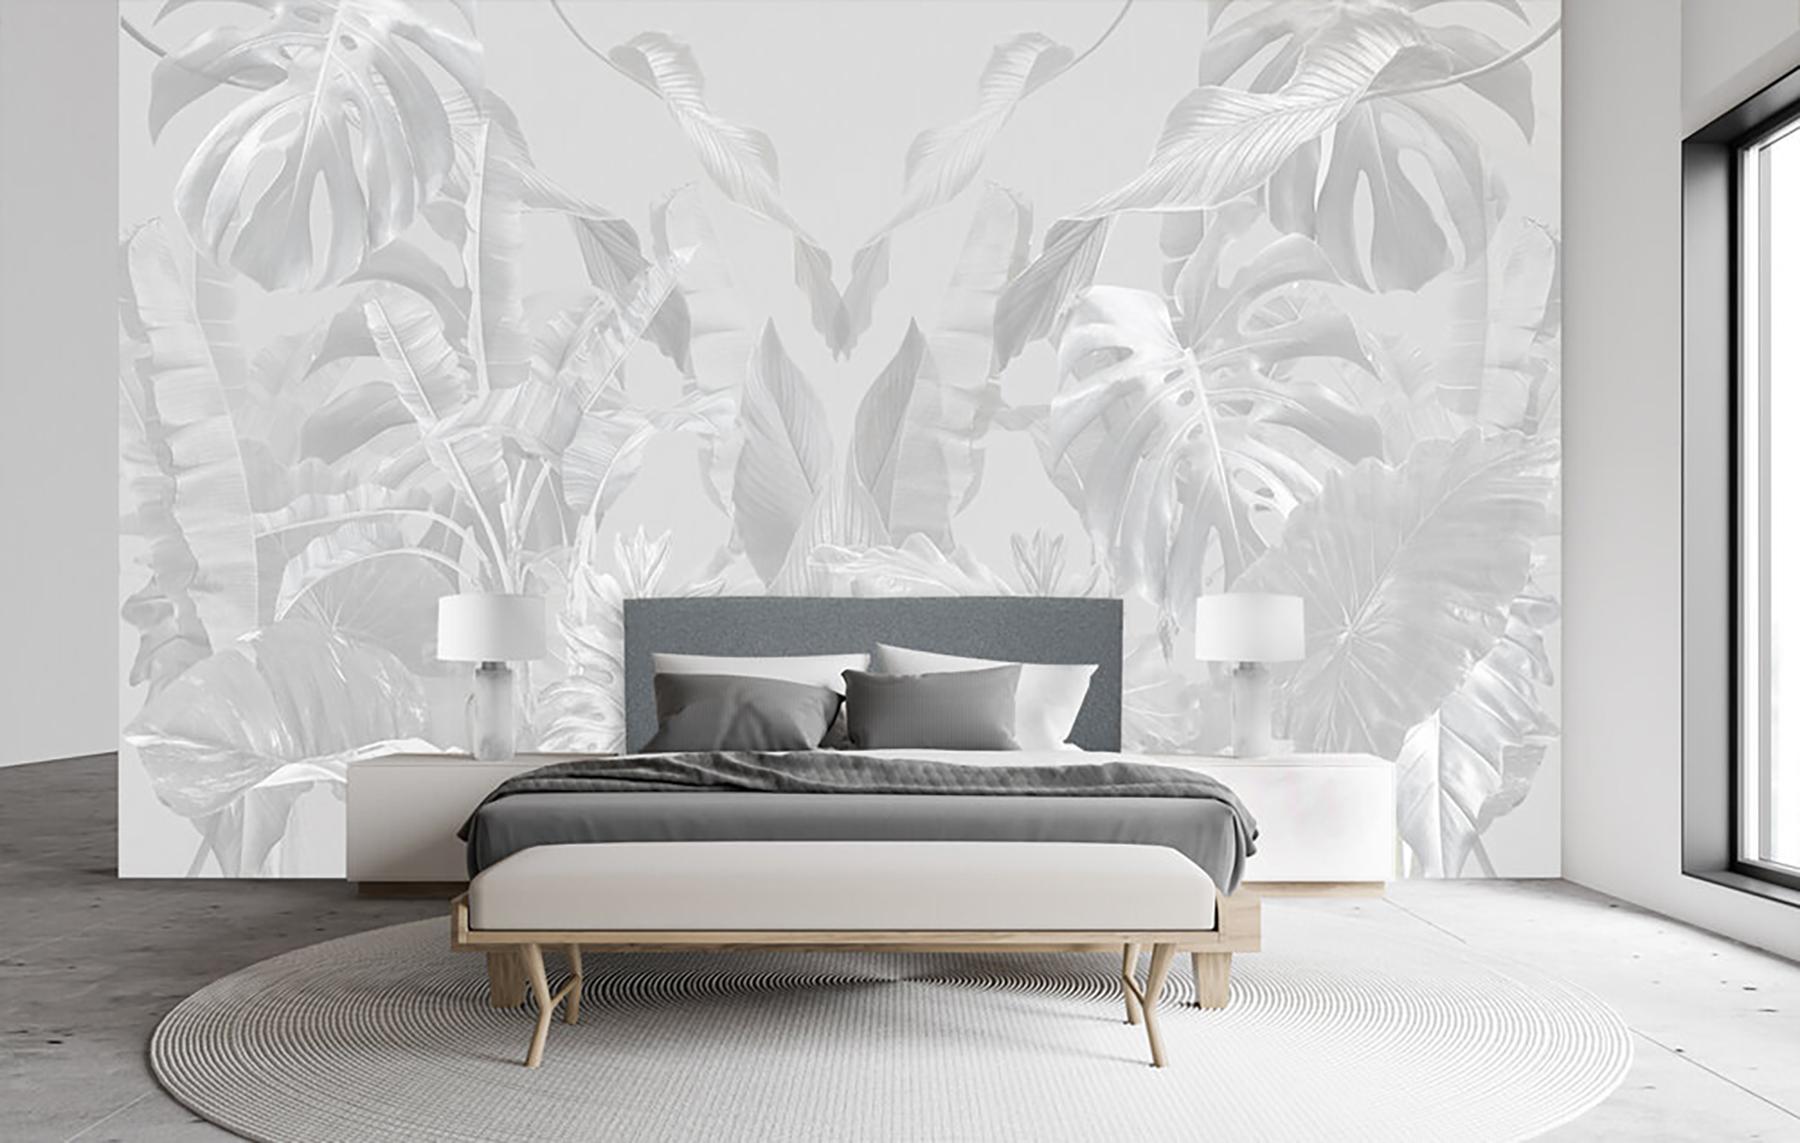 Introducing..... JungleScape by EDGE Collections. 

A whimsical nod to endless Summers and the foliage of our chosen Miami home. JungleScape pays homage to the classic prints of yesteryear, while serving a tropical modernist flair. 

As light